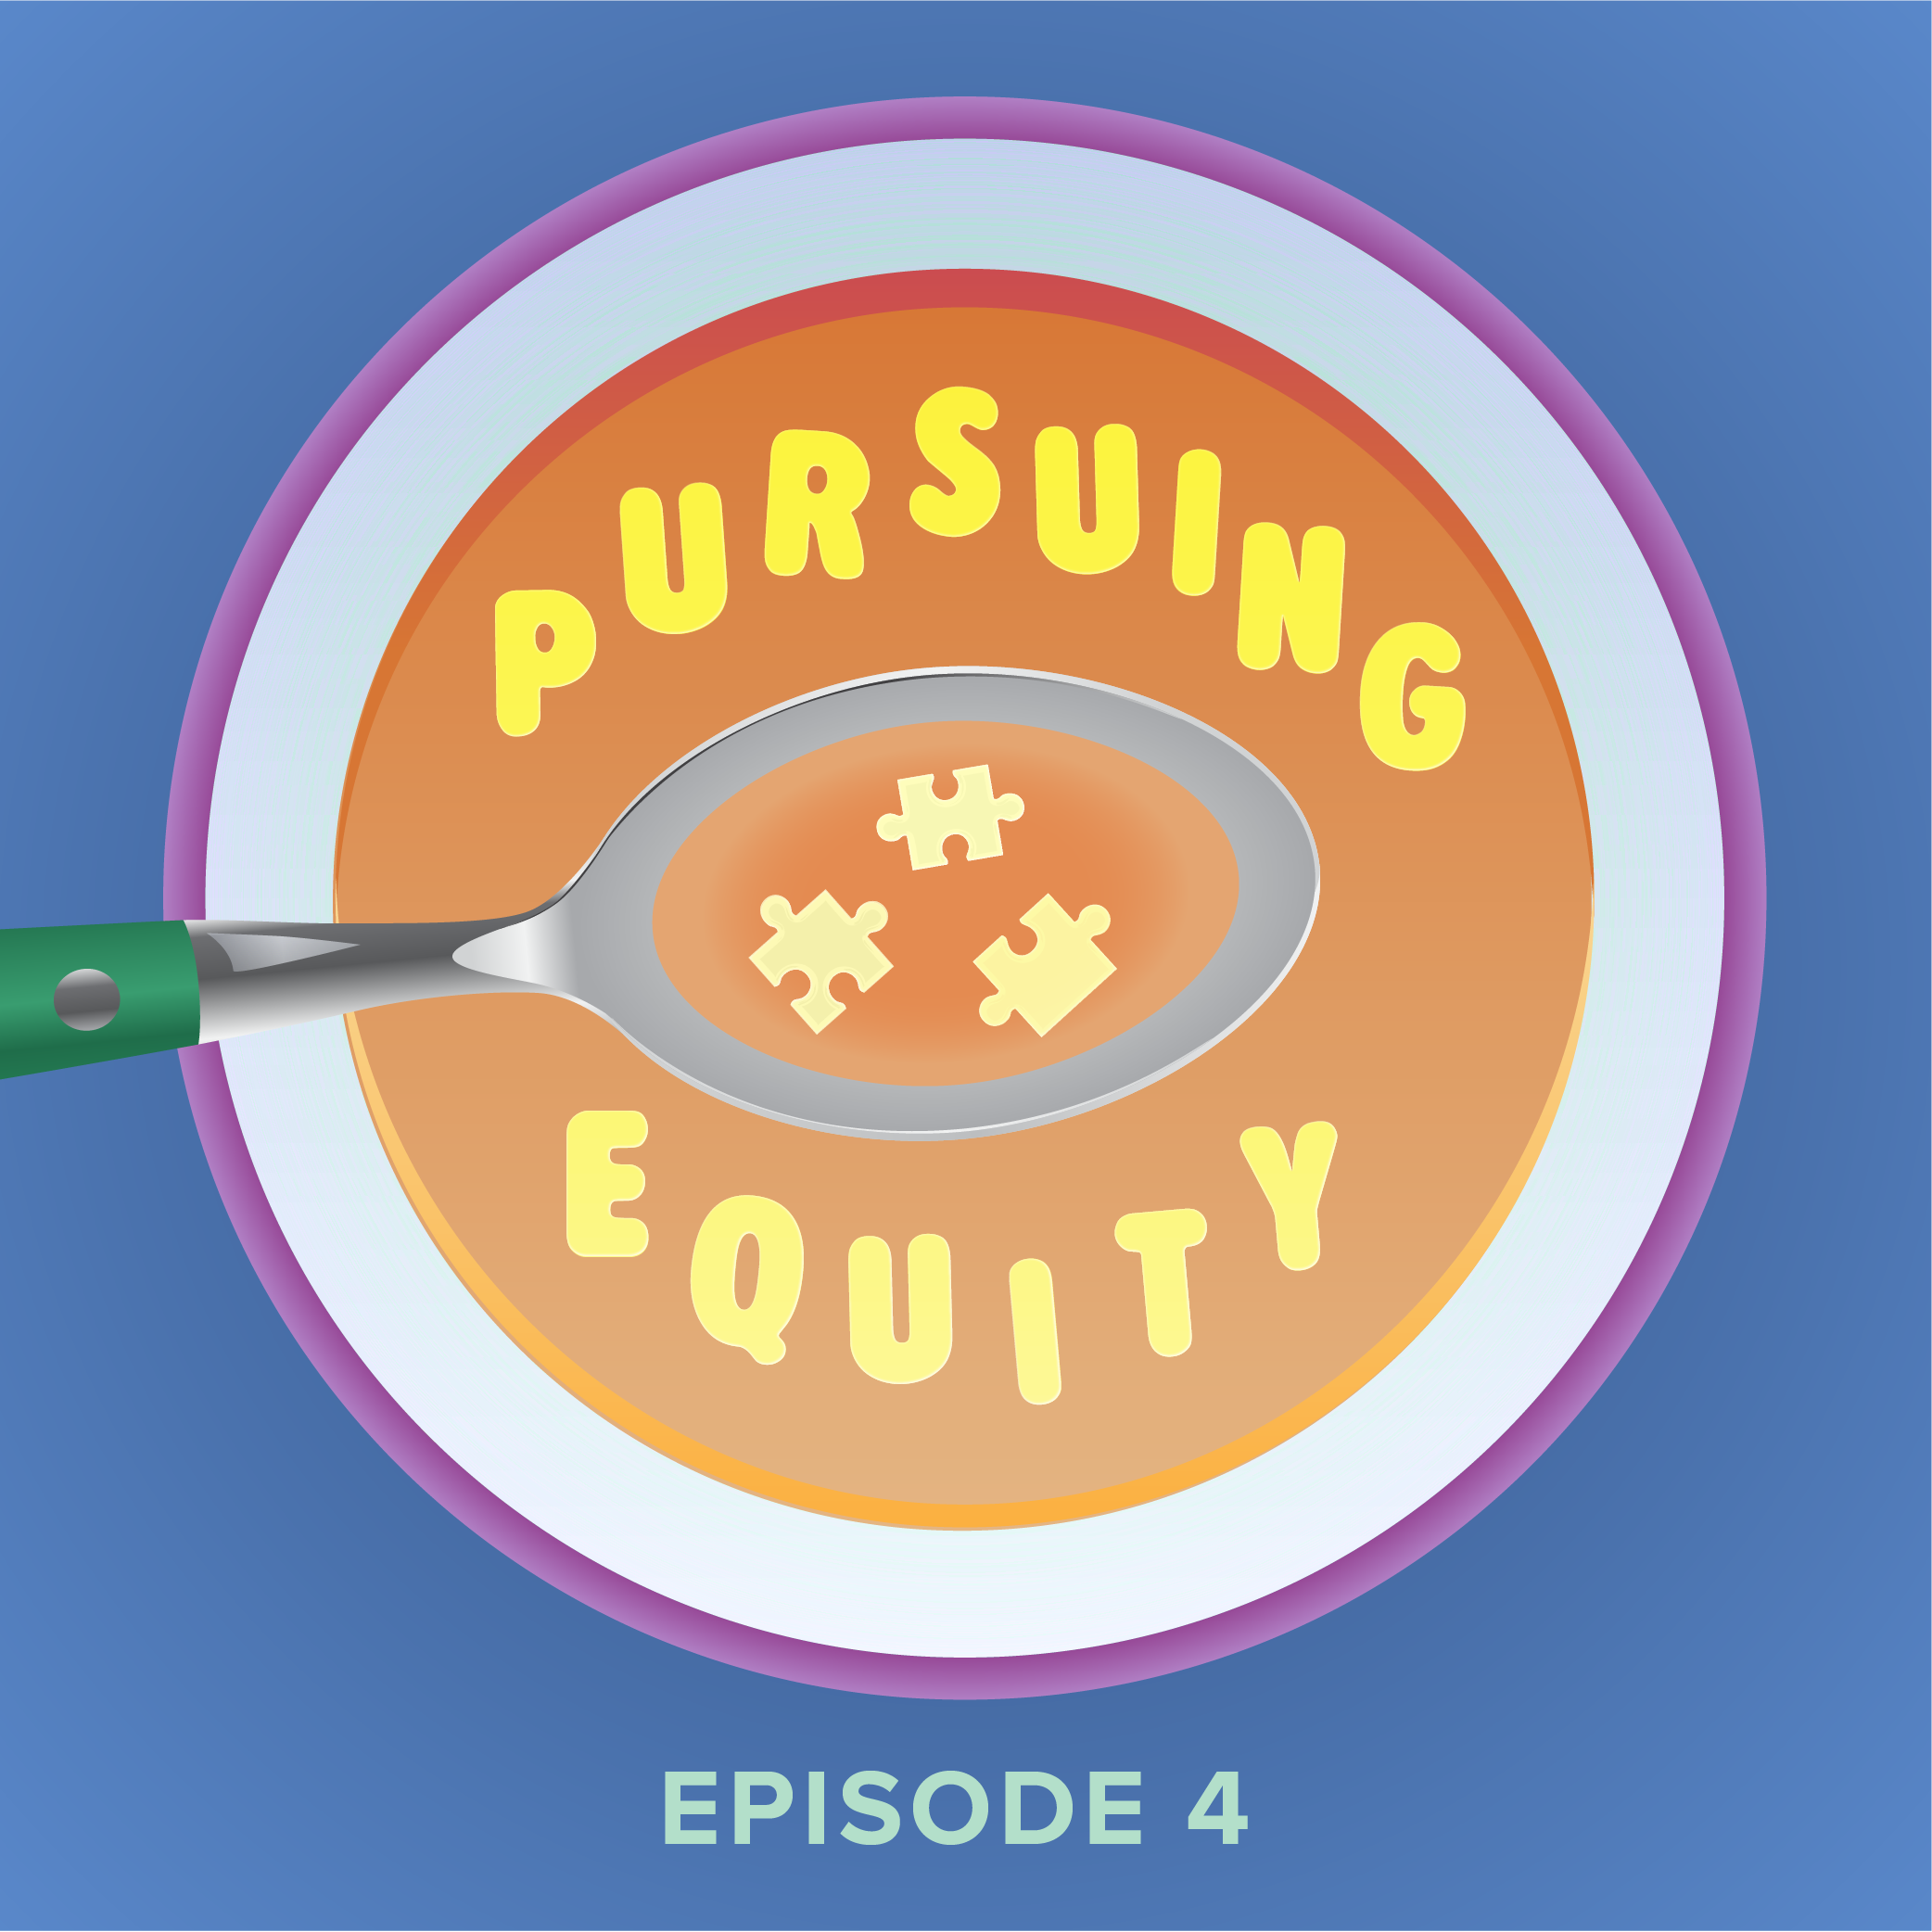 Episode 4: Pursuing Equity and Moving Beyond a Compliance-Driven Approach to Addressing Disproportionality